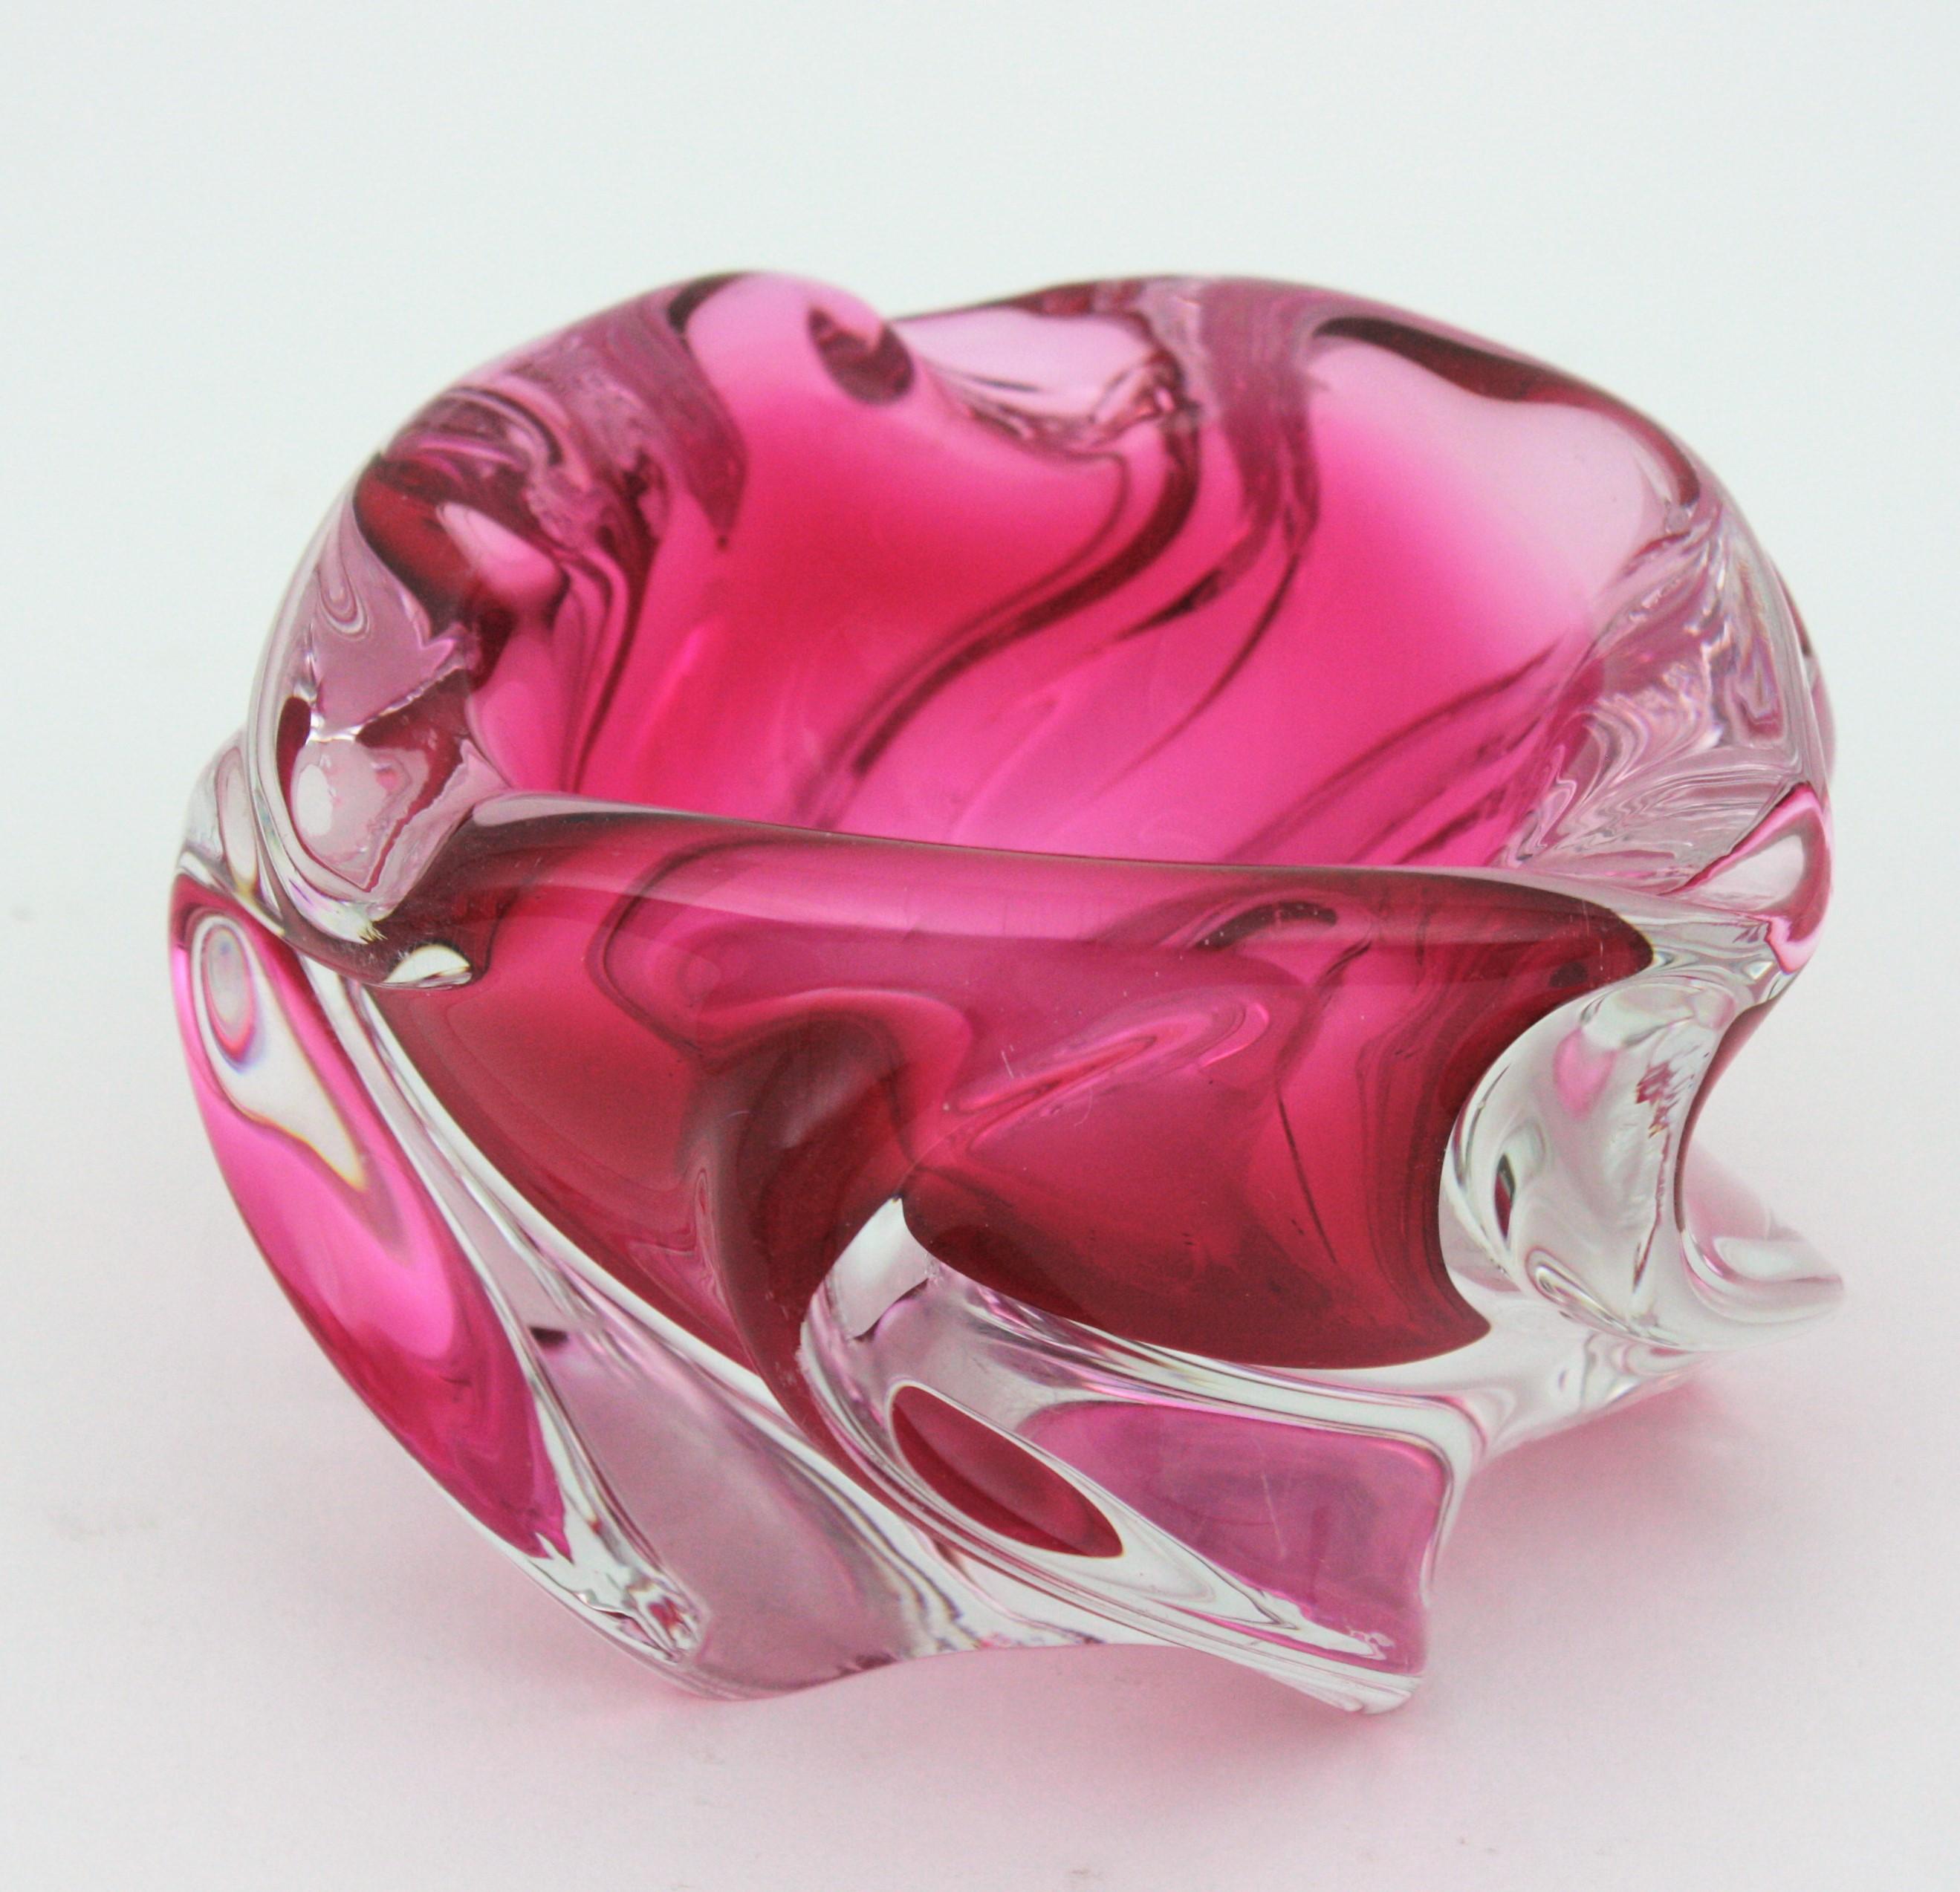 Handblown Murano glass pink and clear Sommerso twisted bowl or ashtray. Attributed to Alfredo Barbini. Italy, 1950s.
This organic shaped bowl is made with pink glass submerged into clear glass. It has a beautiful details with pulled glass creating